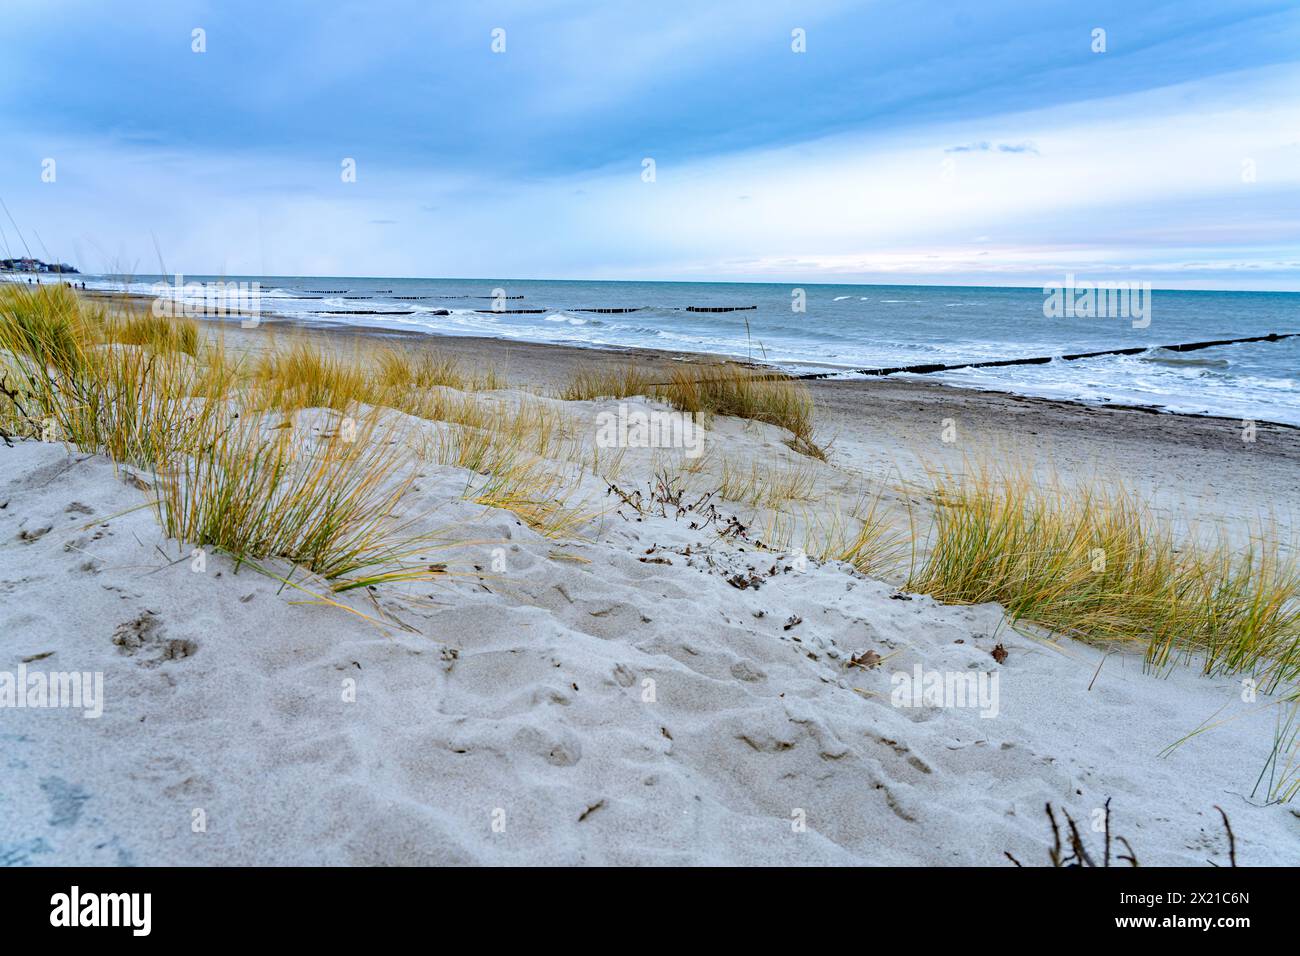 Dunes on the beach of the Baltic Sea resort of Kühlungsborn in winter, Mecklenburg-Western Pomerania, Germany Stock Photo